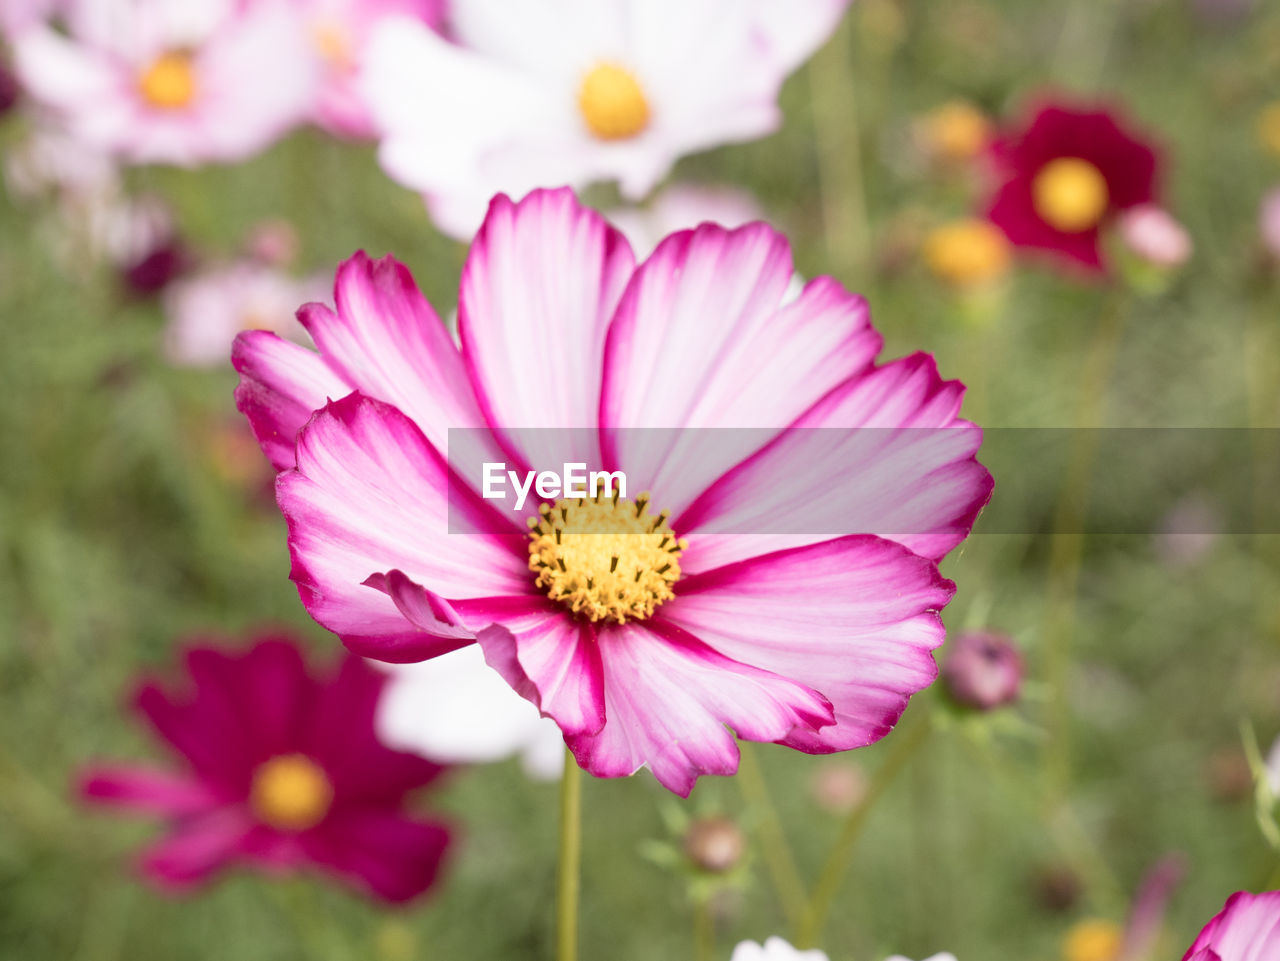 CLOSE-UP OF PINK COSMOS FLOWER AGAINST BLURRED BACKGROUND